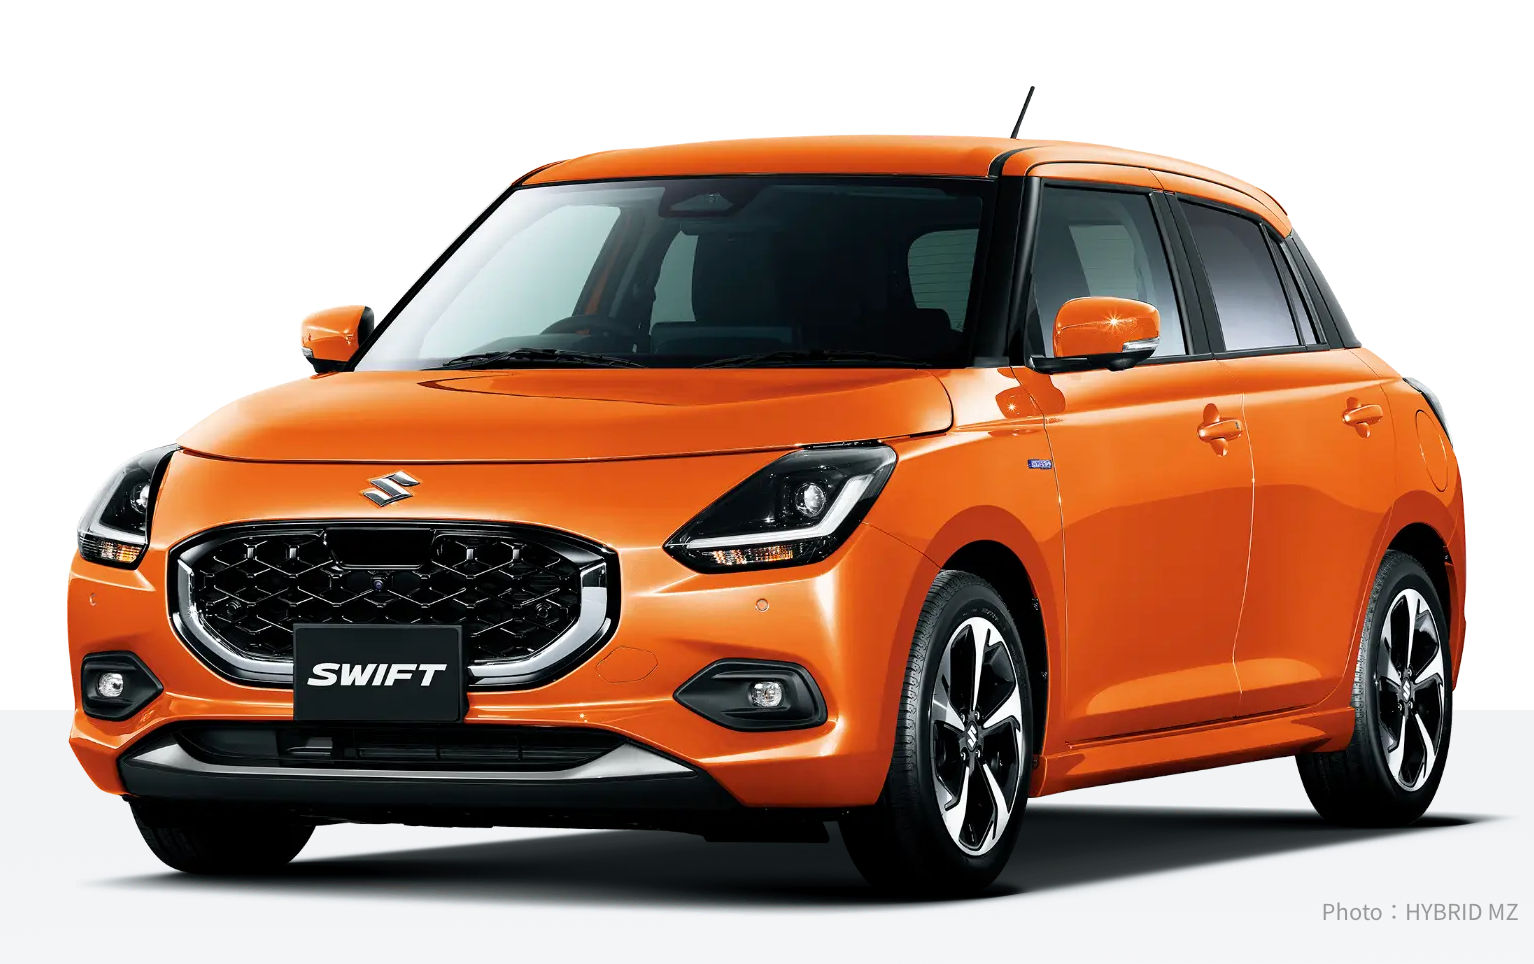 New Suzuki Swift Colour Detailed! Which Ones Do You Want For The